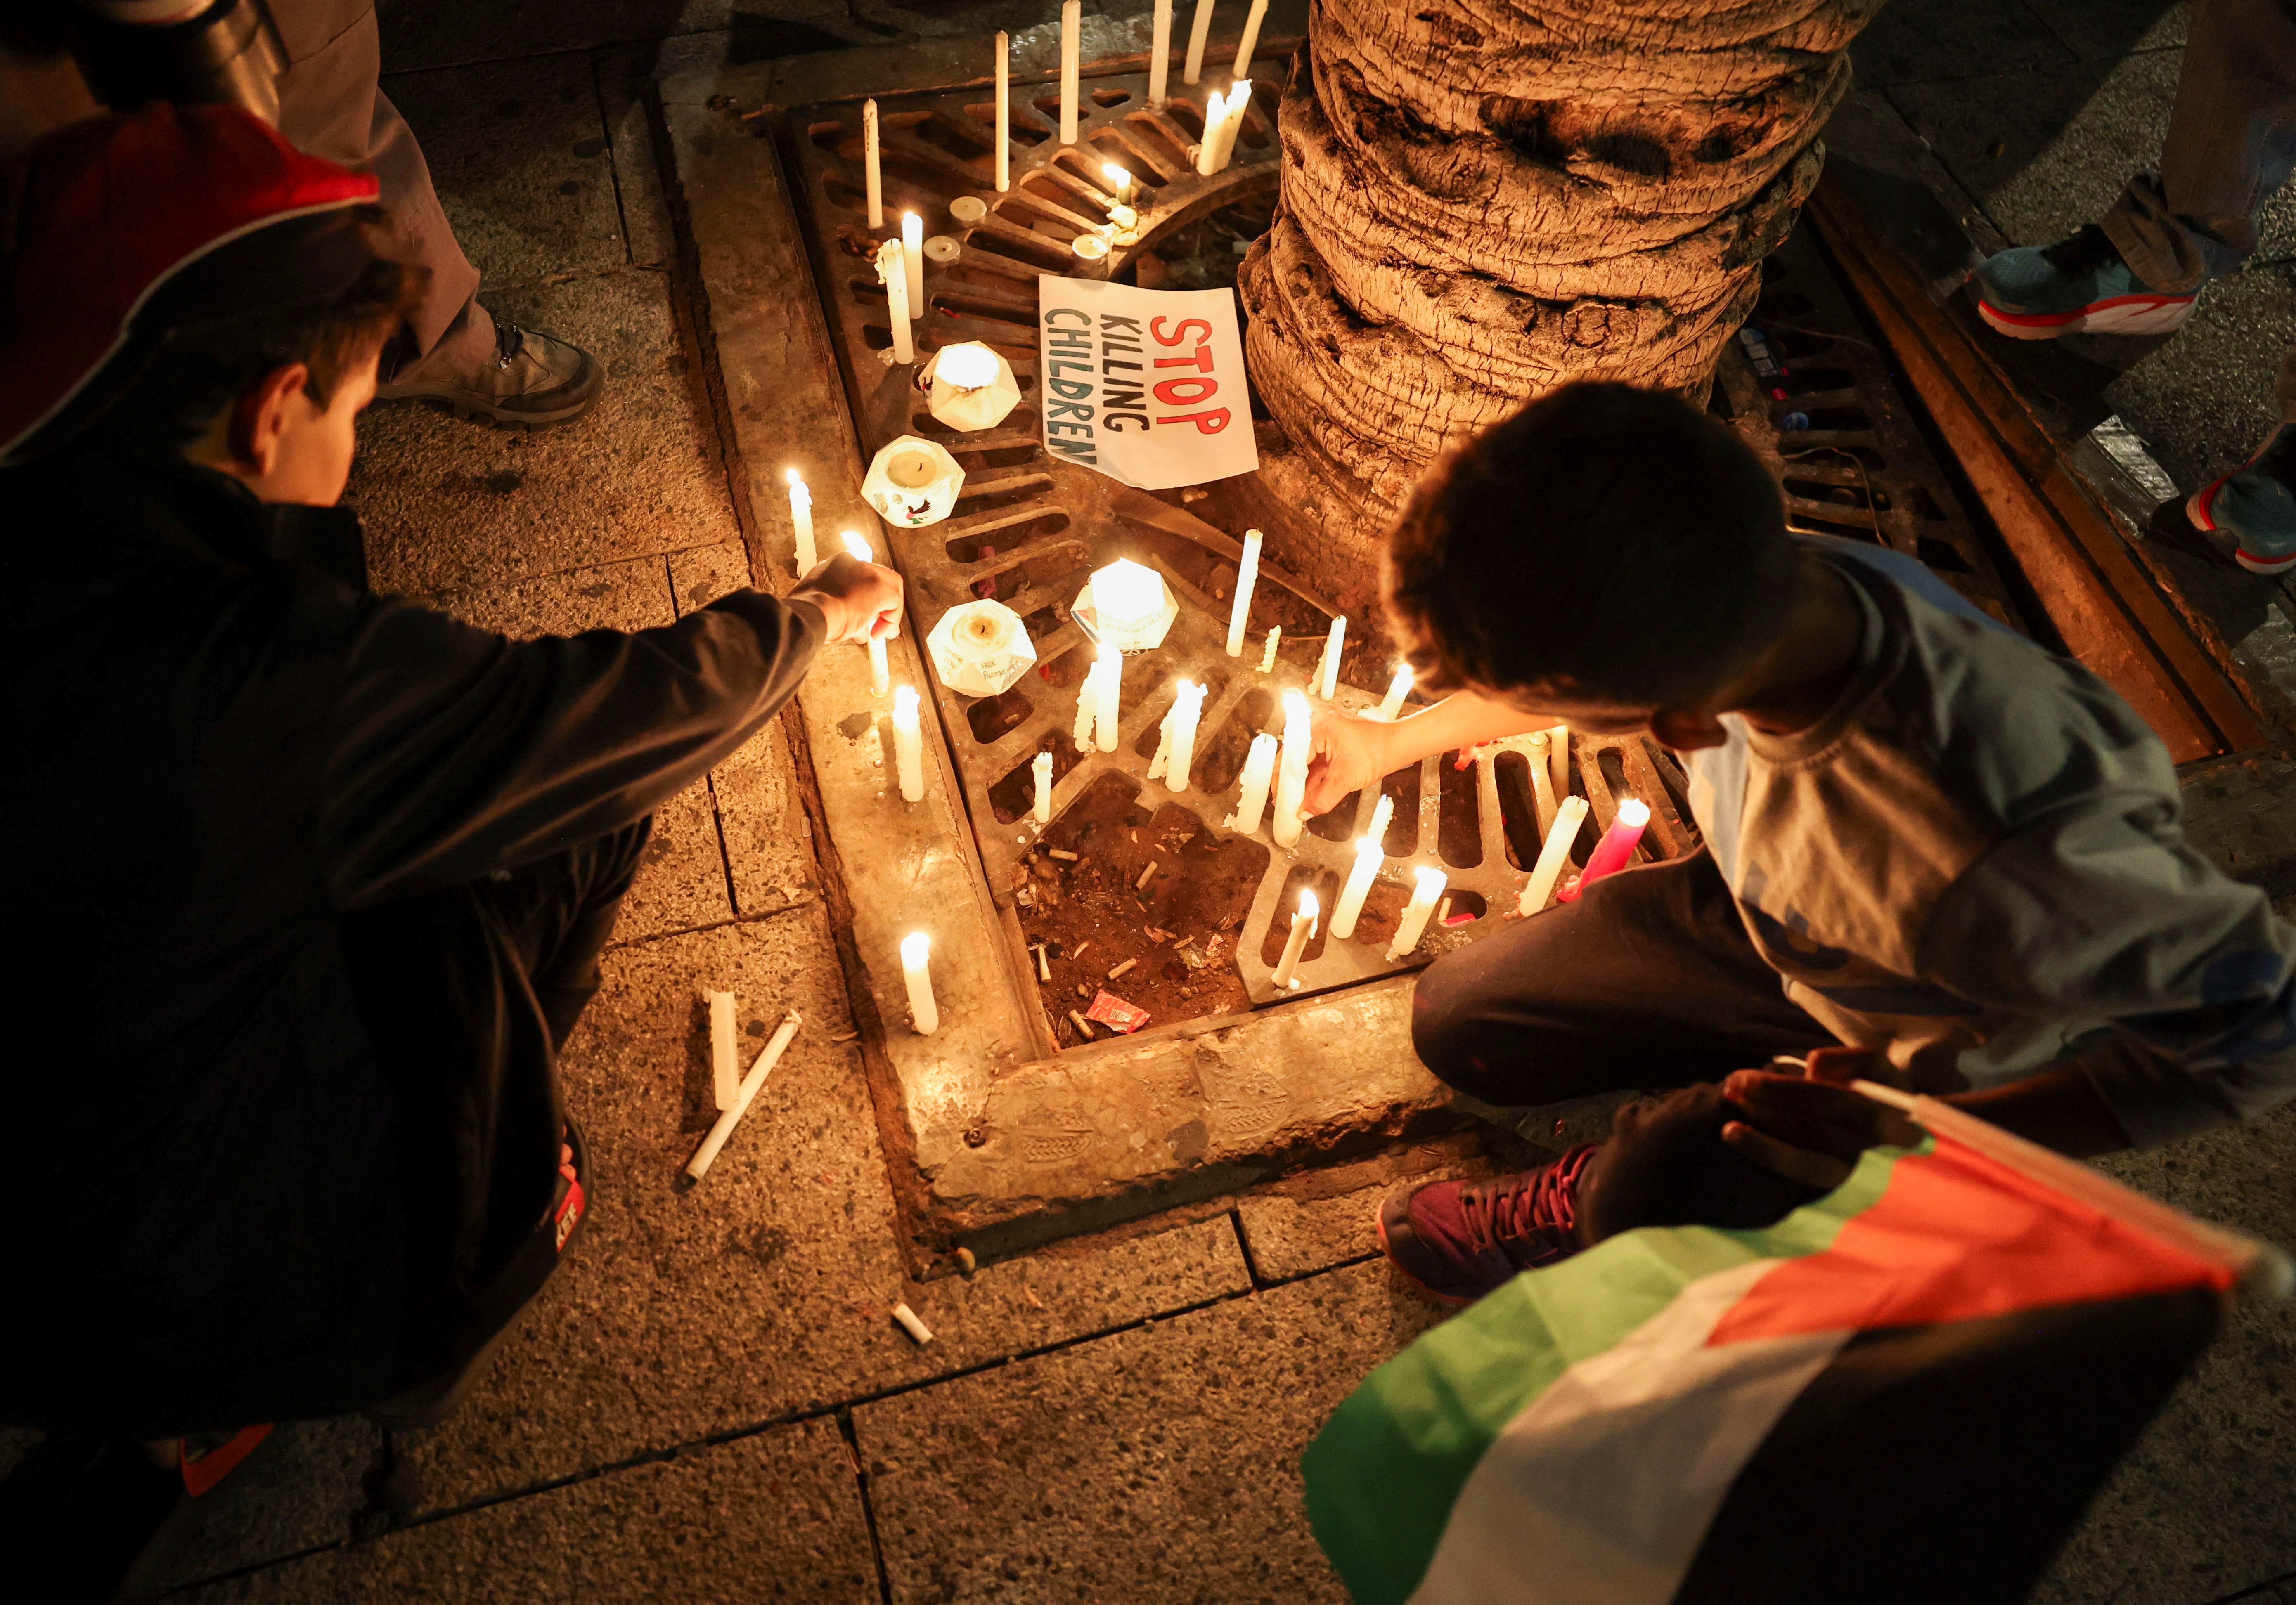 People take part in a candlelight vigil in support of Palestinians in Gaza, in Beirut